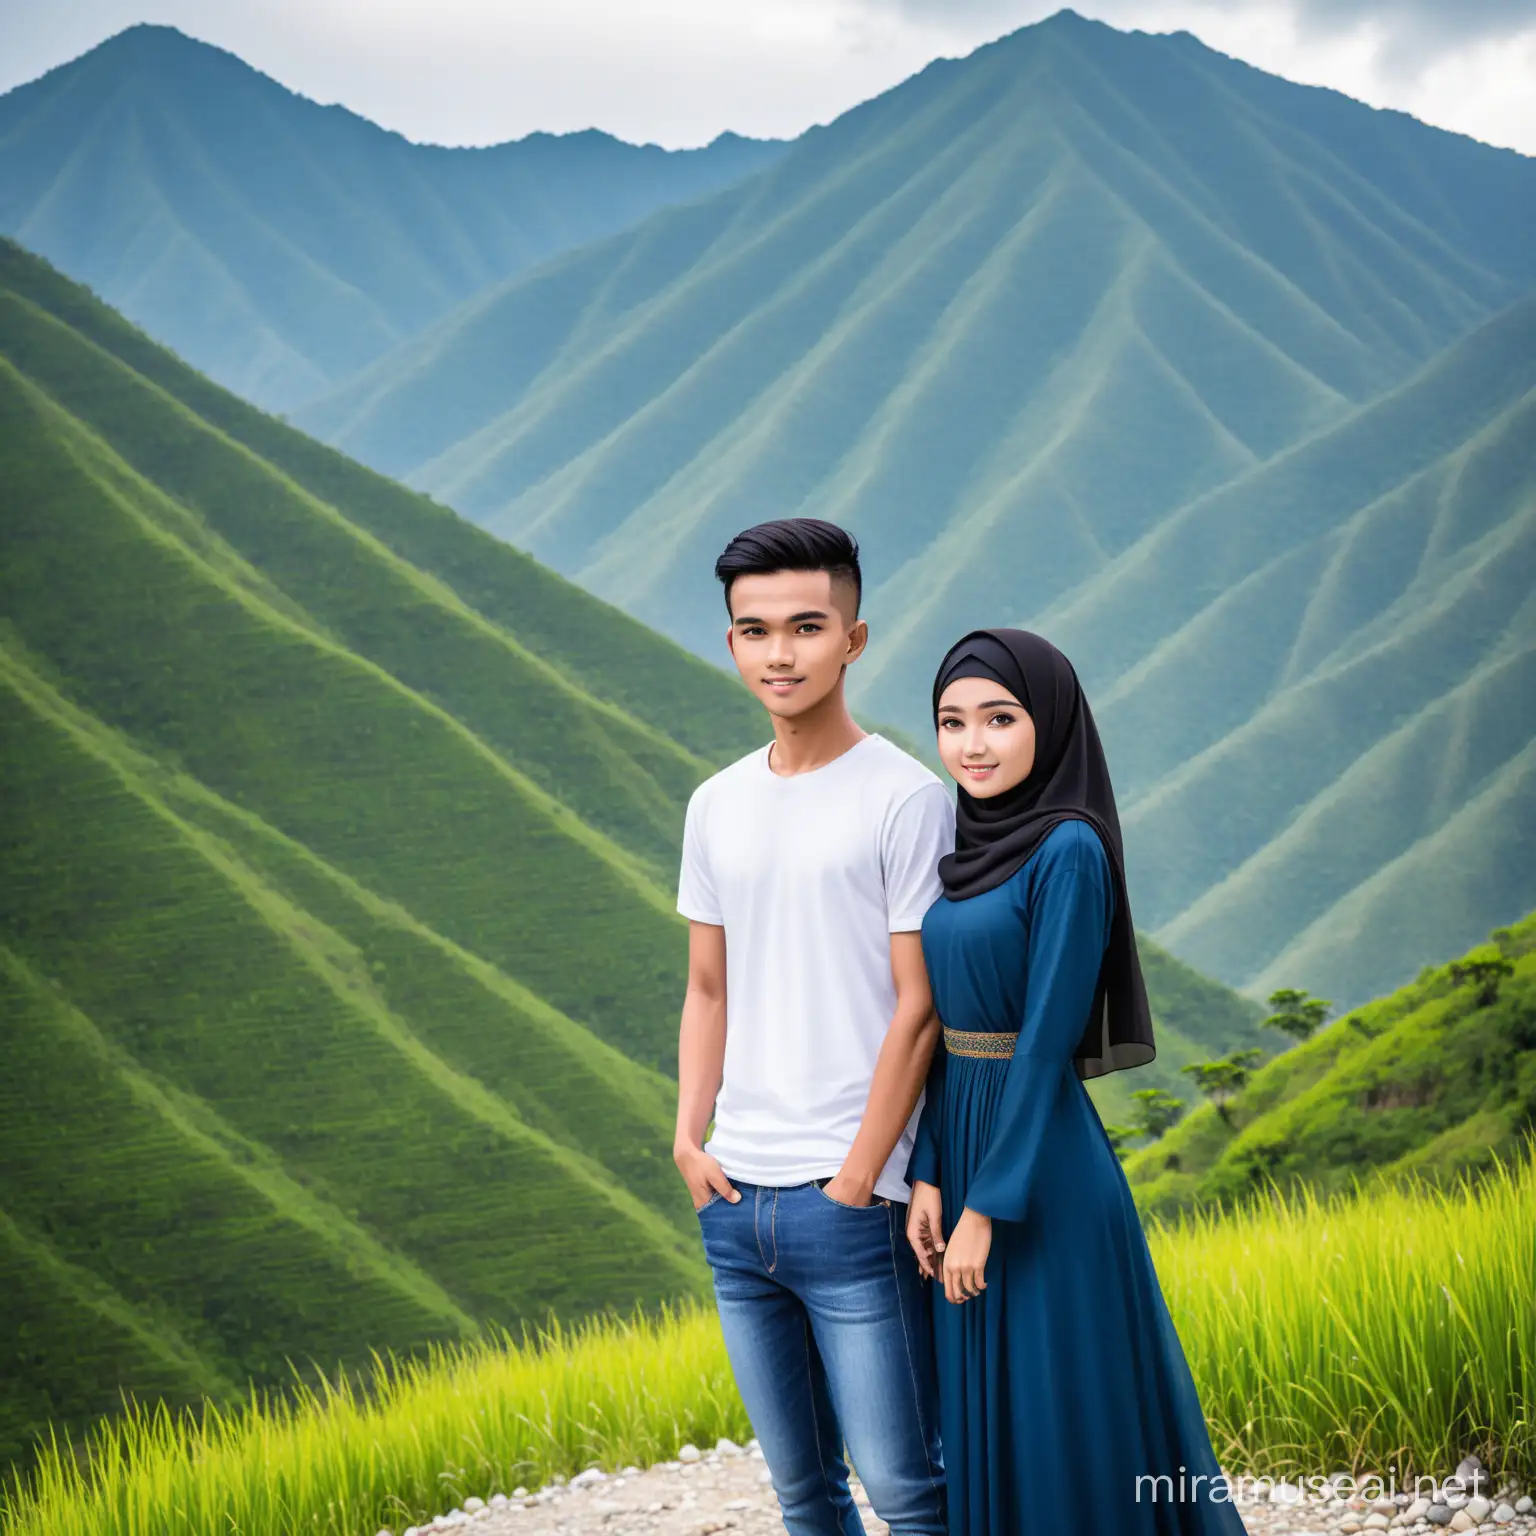 Young Indonesian Couple Embracing in Mountain Scenery